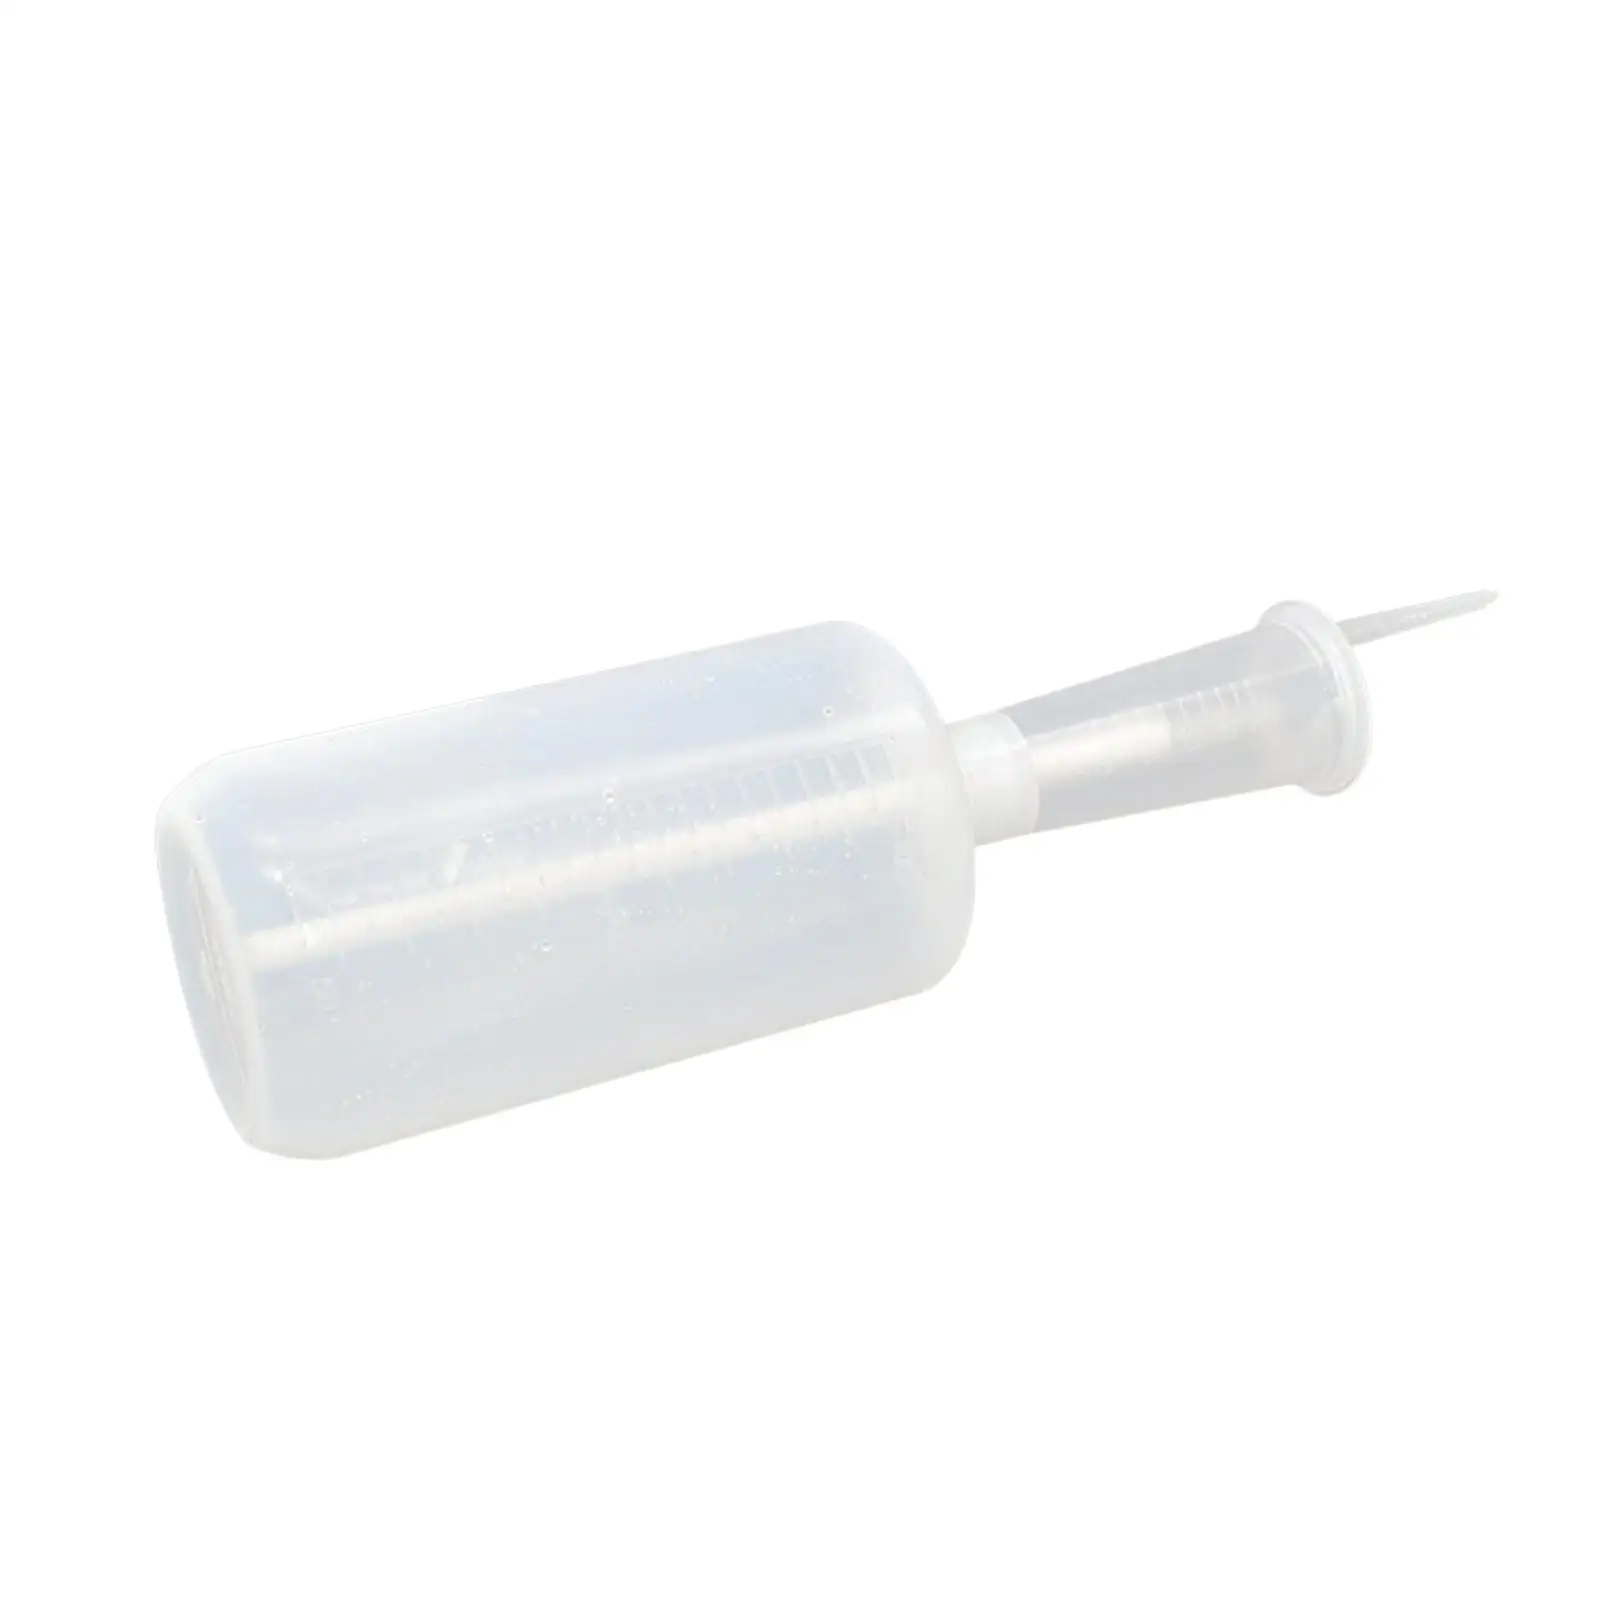 Oxalic Acid Dosage Syringe for Beekeeping Clear Squeeze Bottle Durable